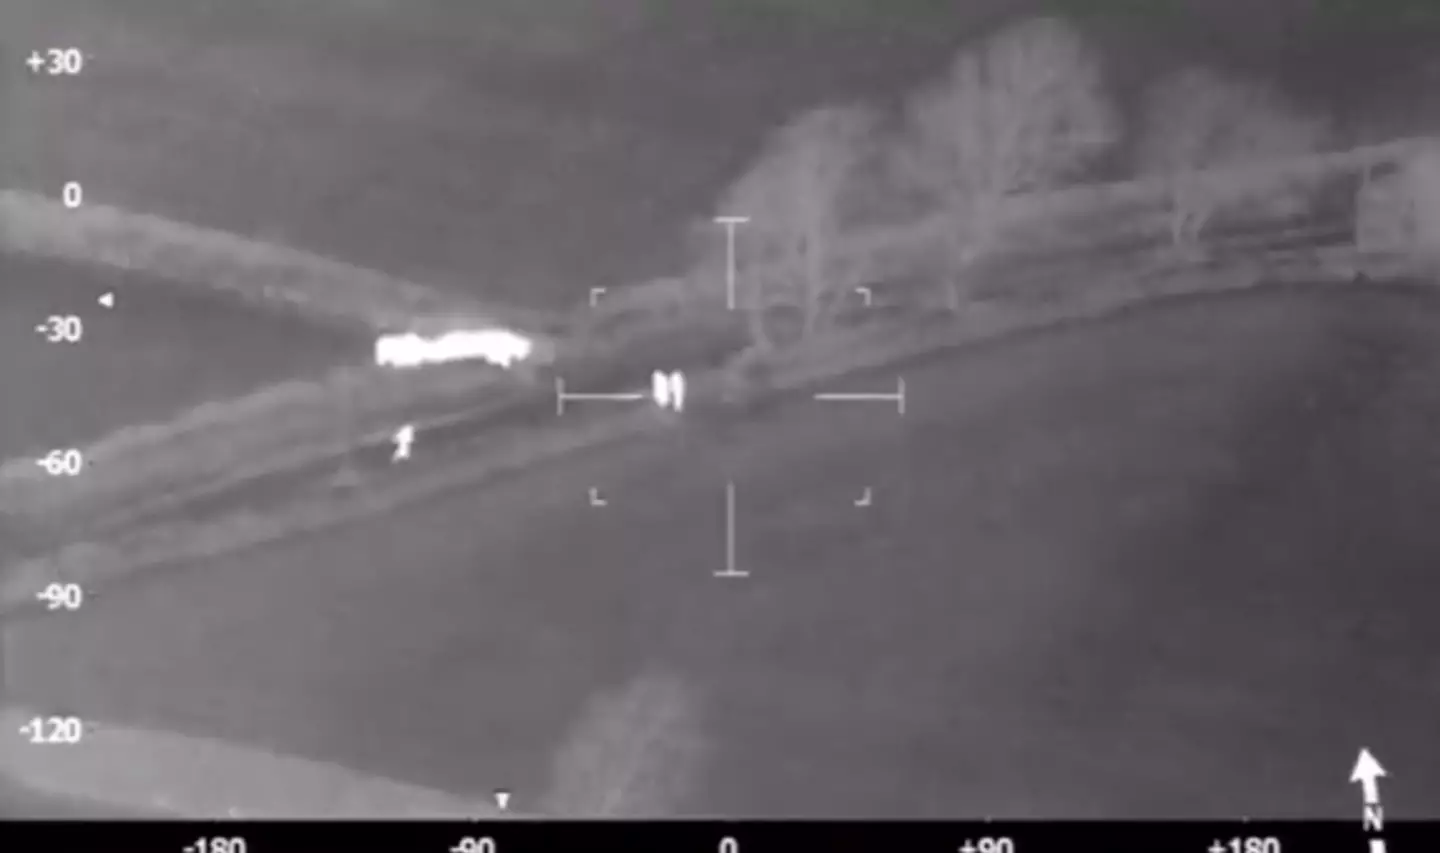 The officer in the helicopter told his colleagues on the ground to ‘thank the cows’.